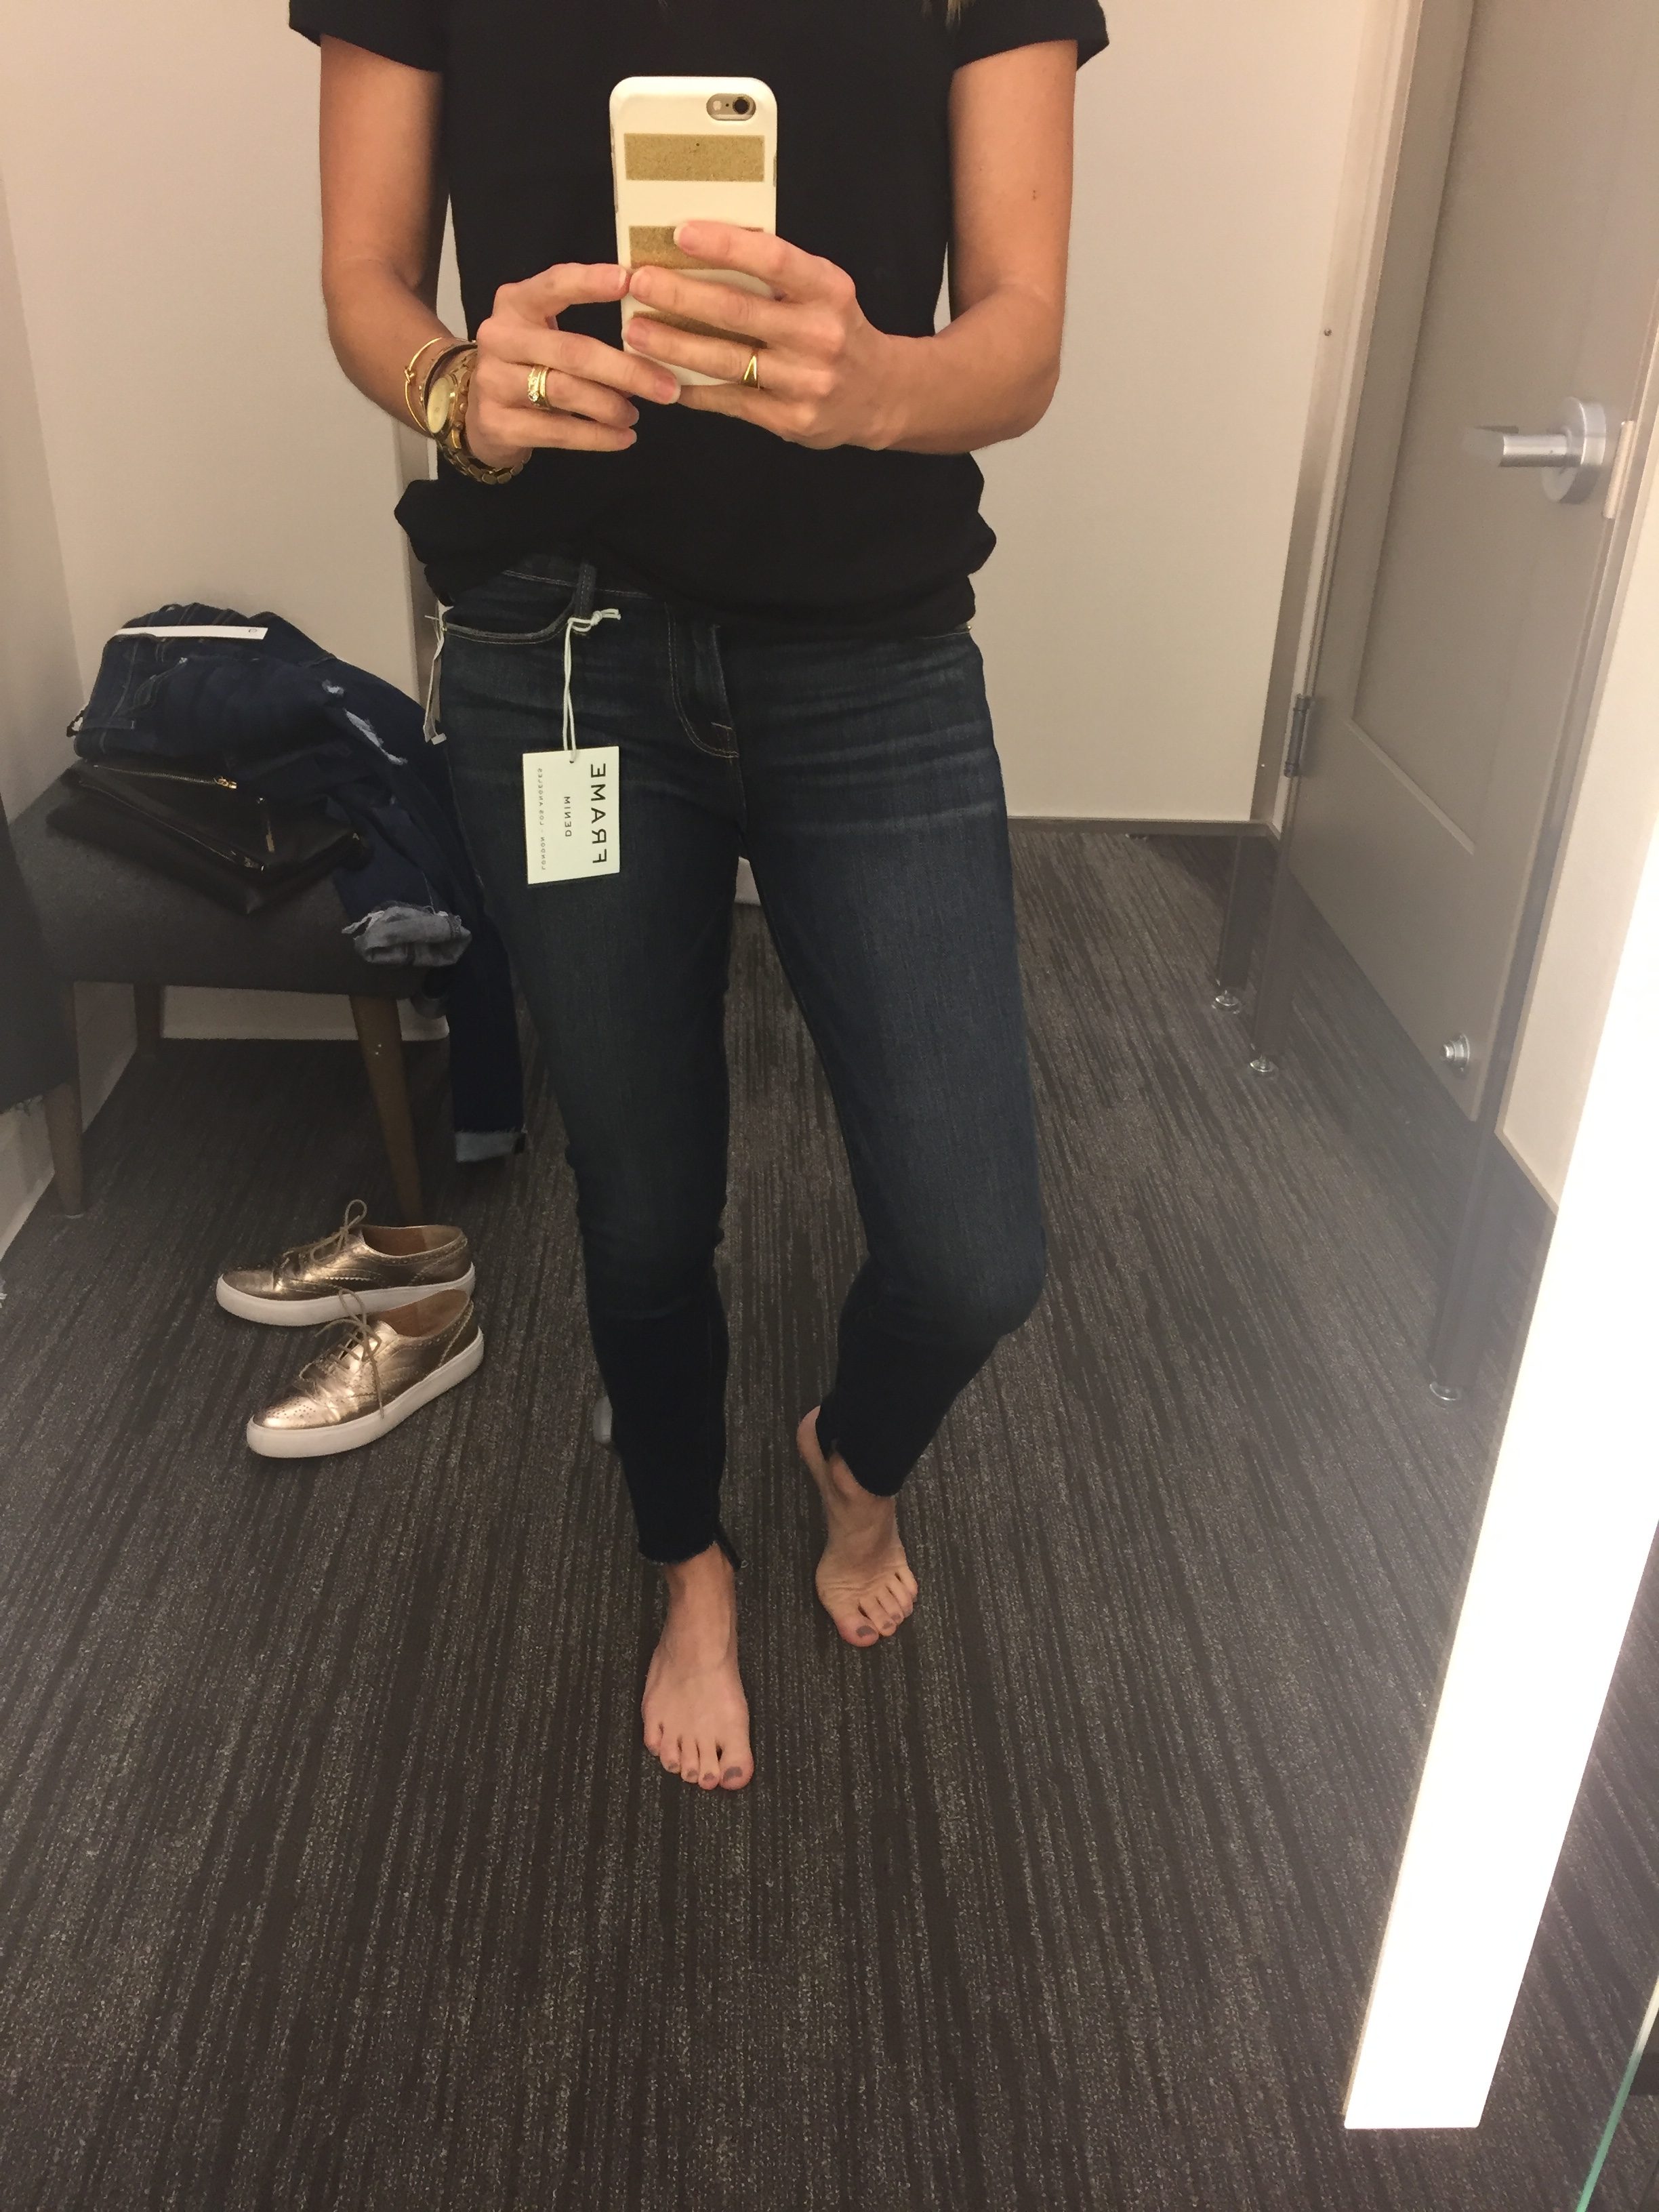 jean shopping, denim, skinny jeans, designer denim, everyday style, shopping, tips for buying jeans, my style, method39, find your fit, current elliott, frame, seven for all mankind, rag and bone